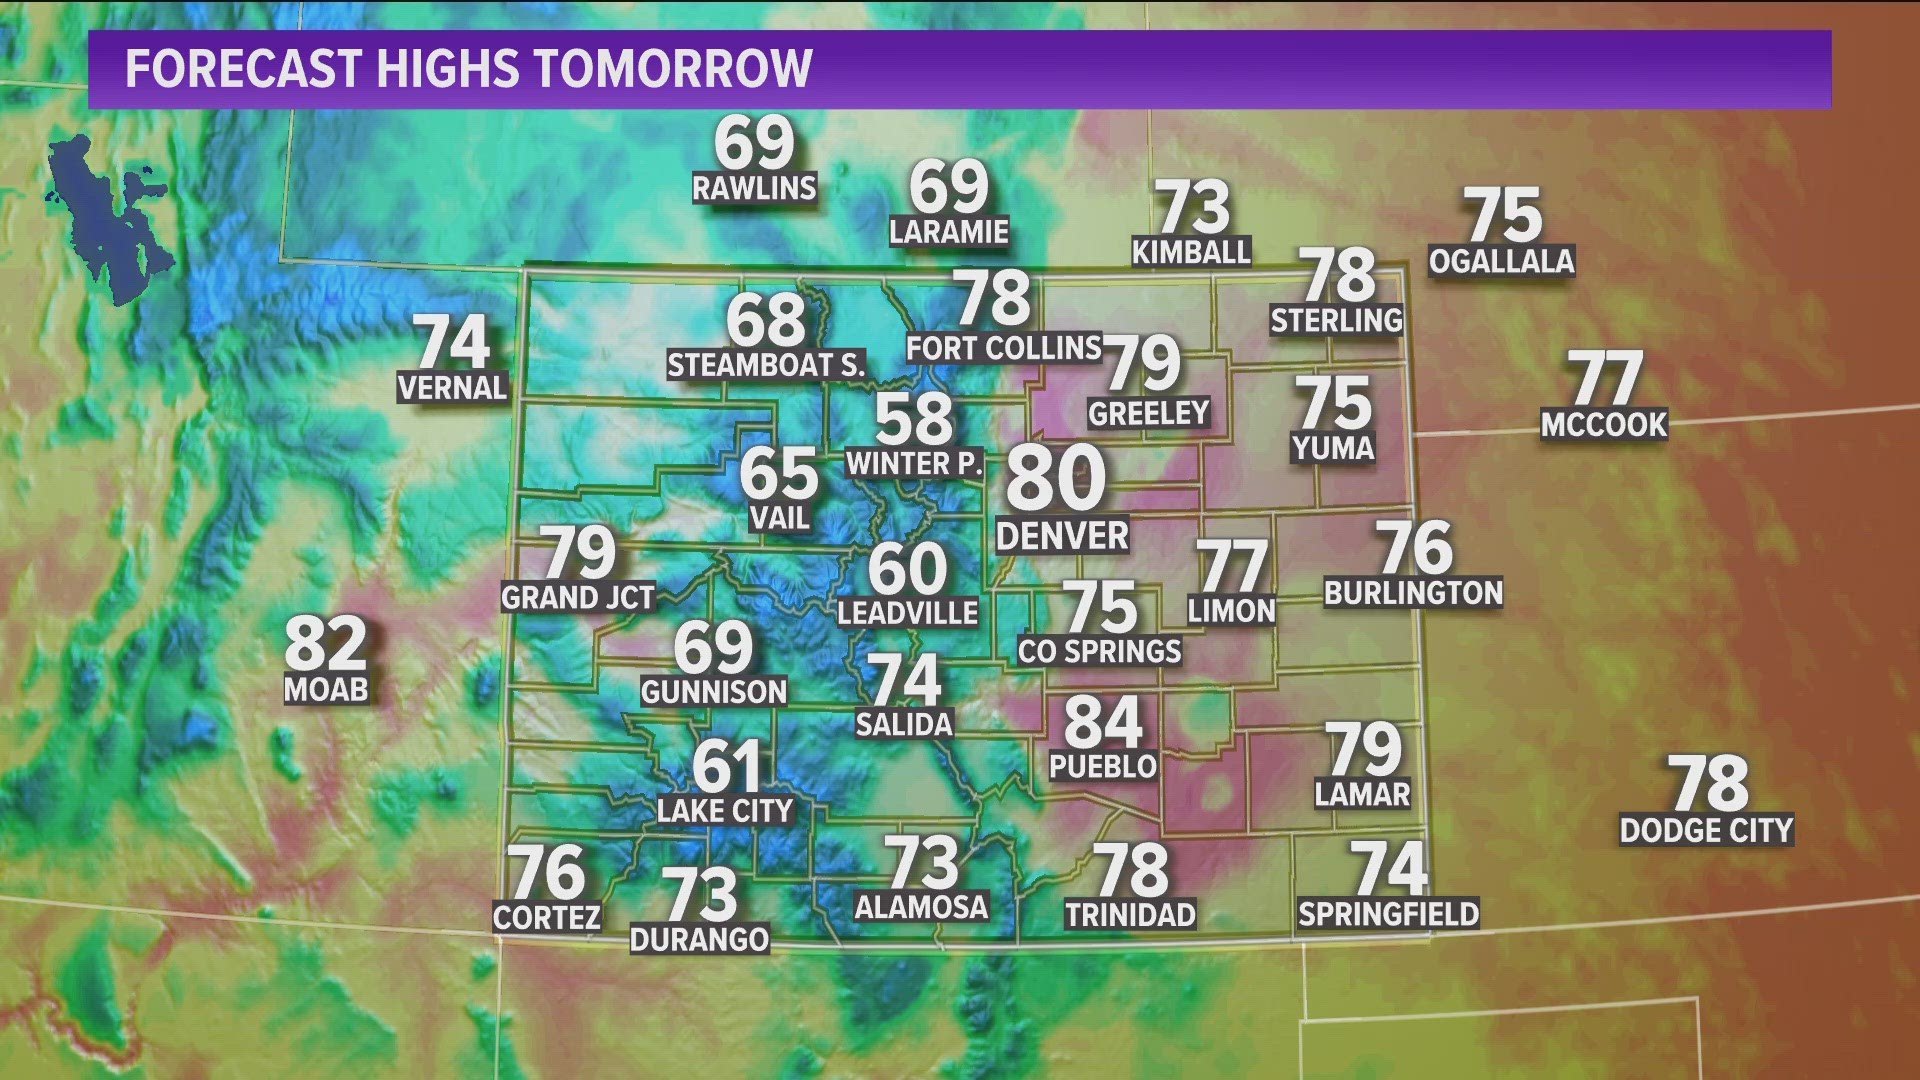 Another chance of storms for the Front Range and eastern plains on Saturday. Highs will be around 80.